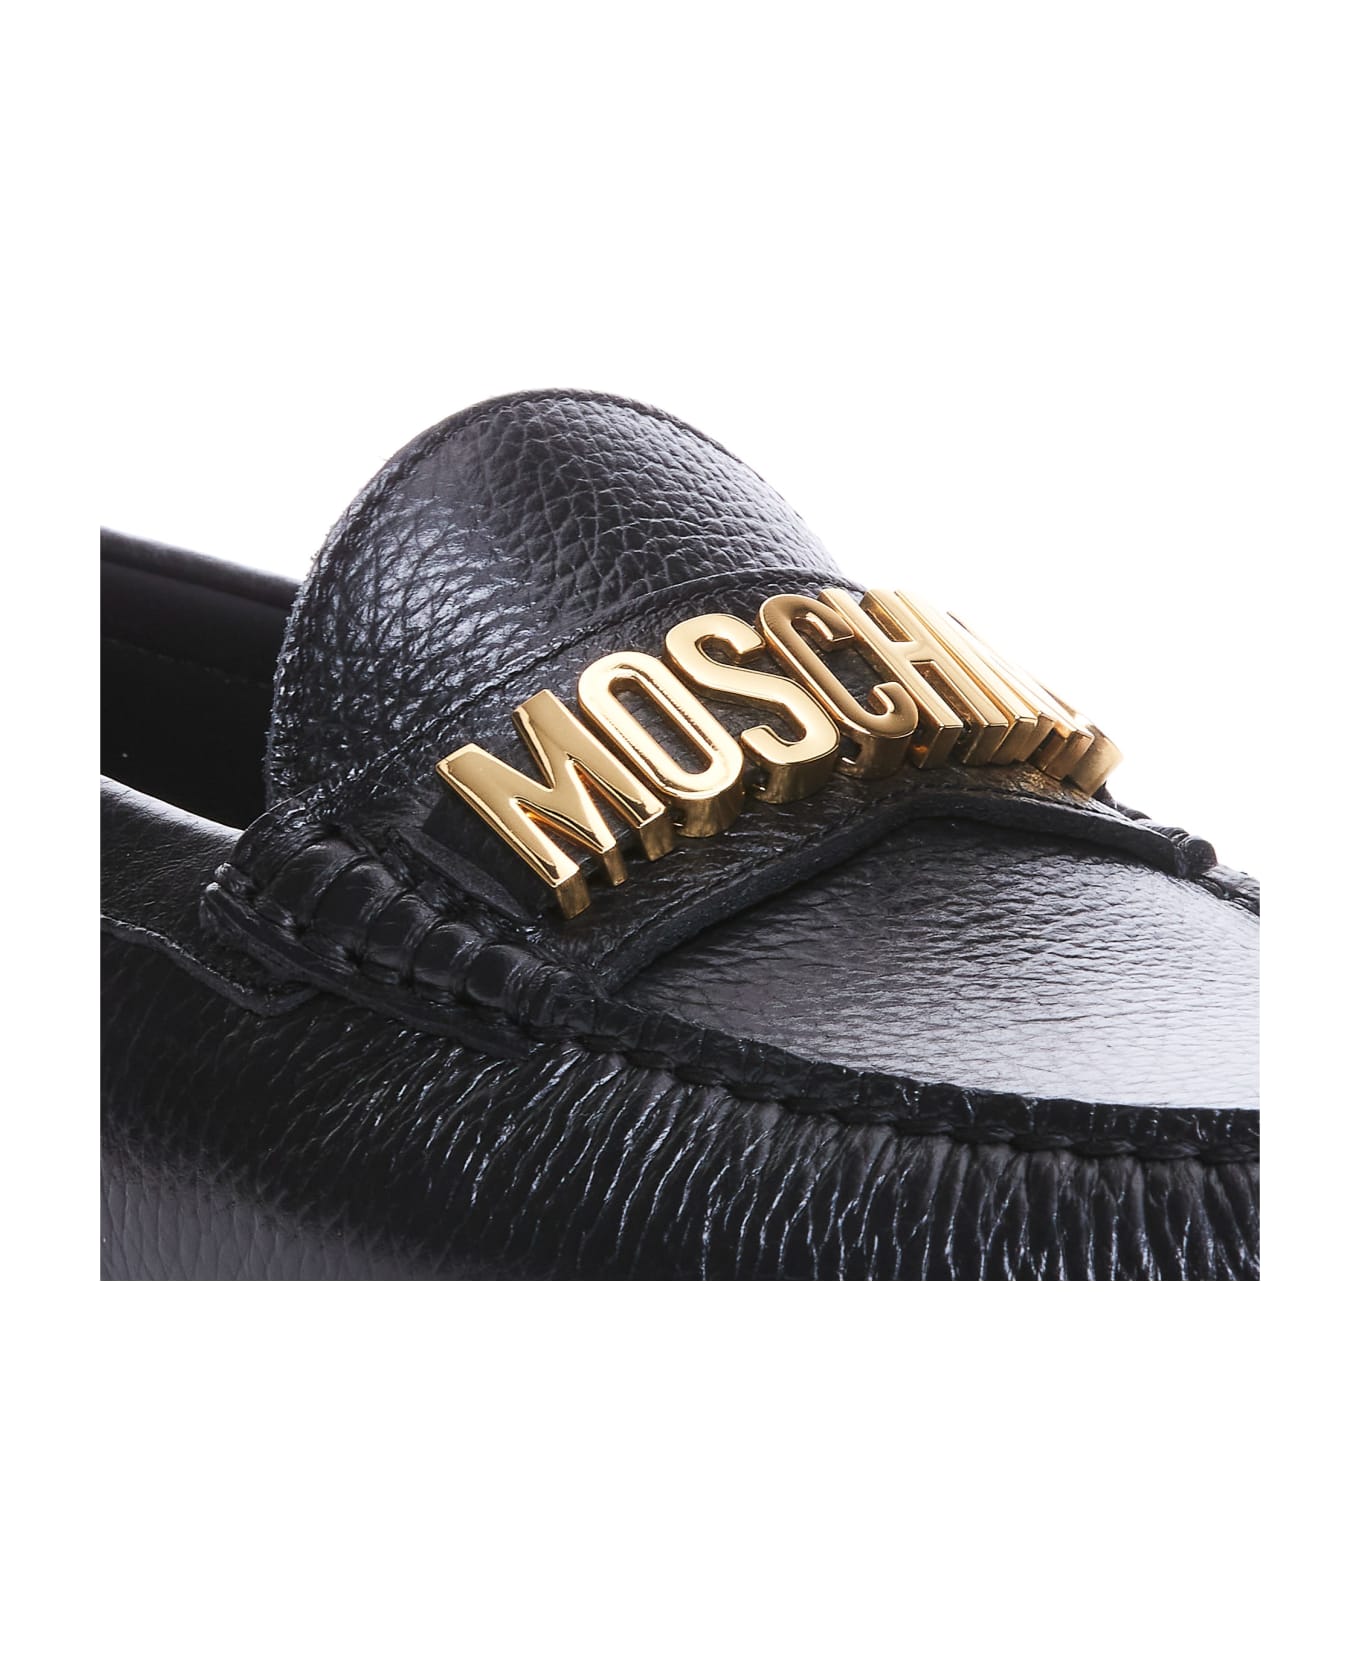 Moschino Loafers - Black